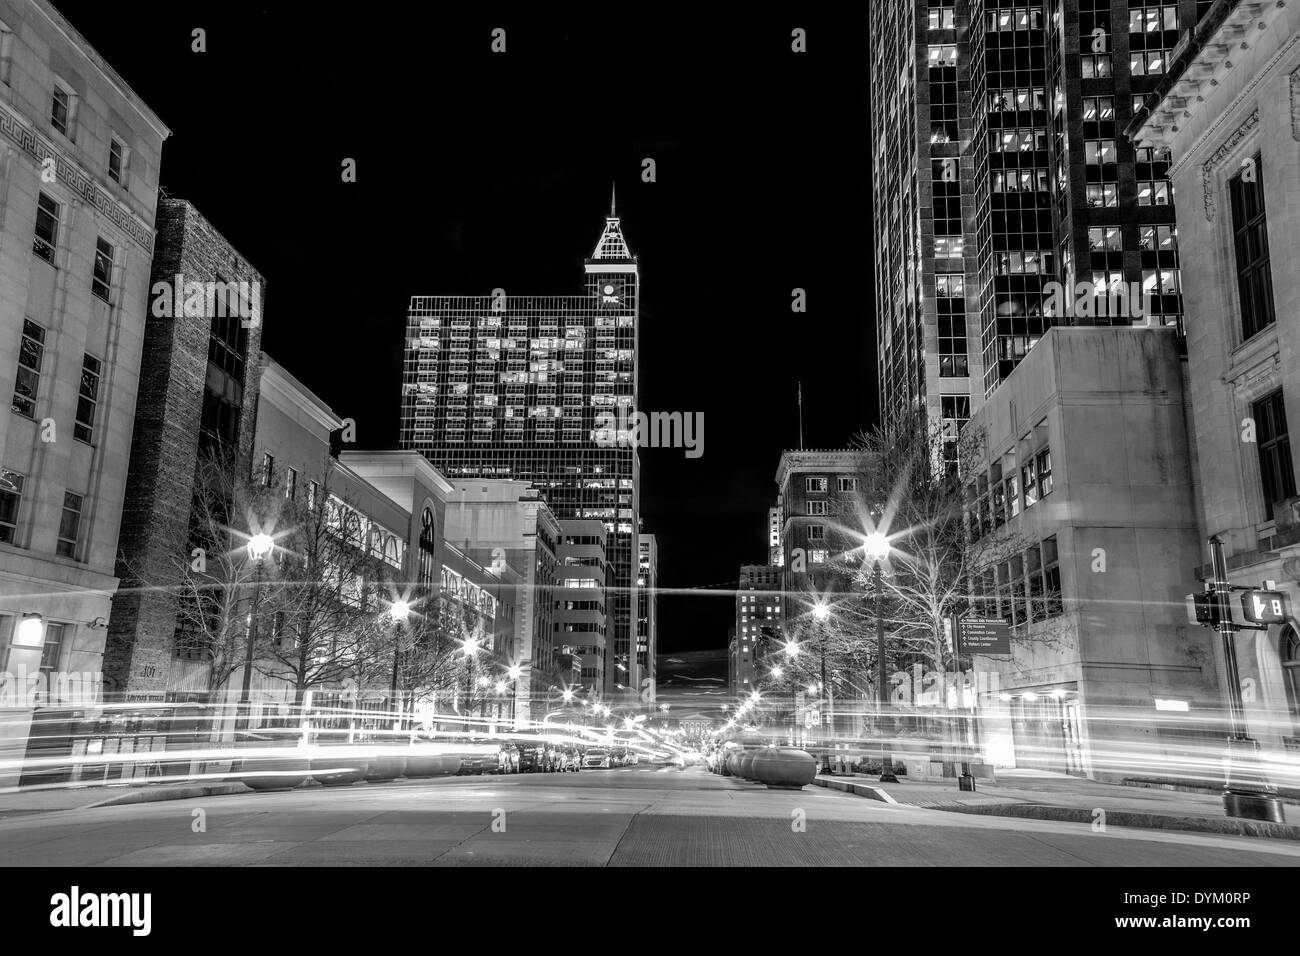 Raleigh NC night photo with light trails black and white Stock Photo